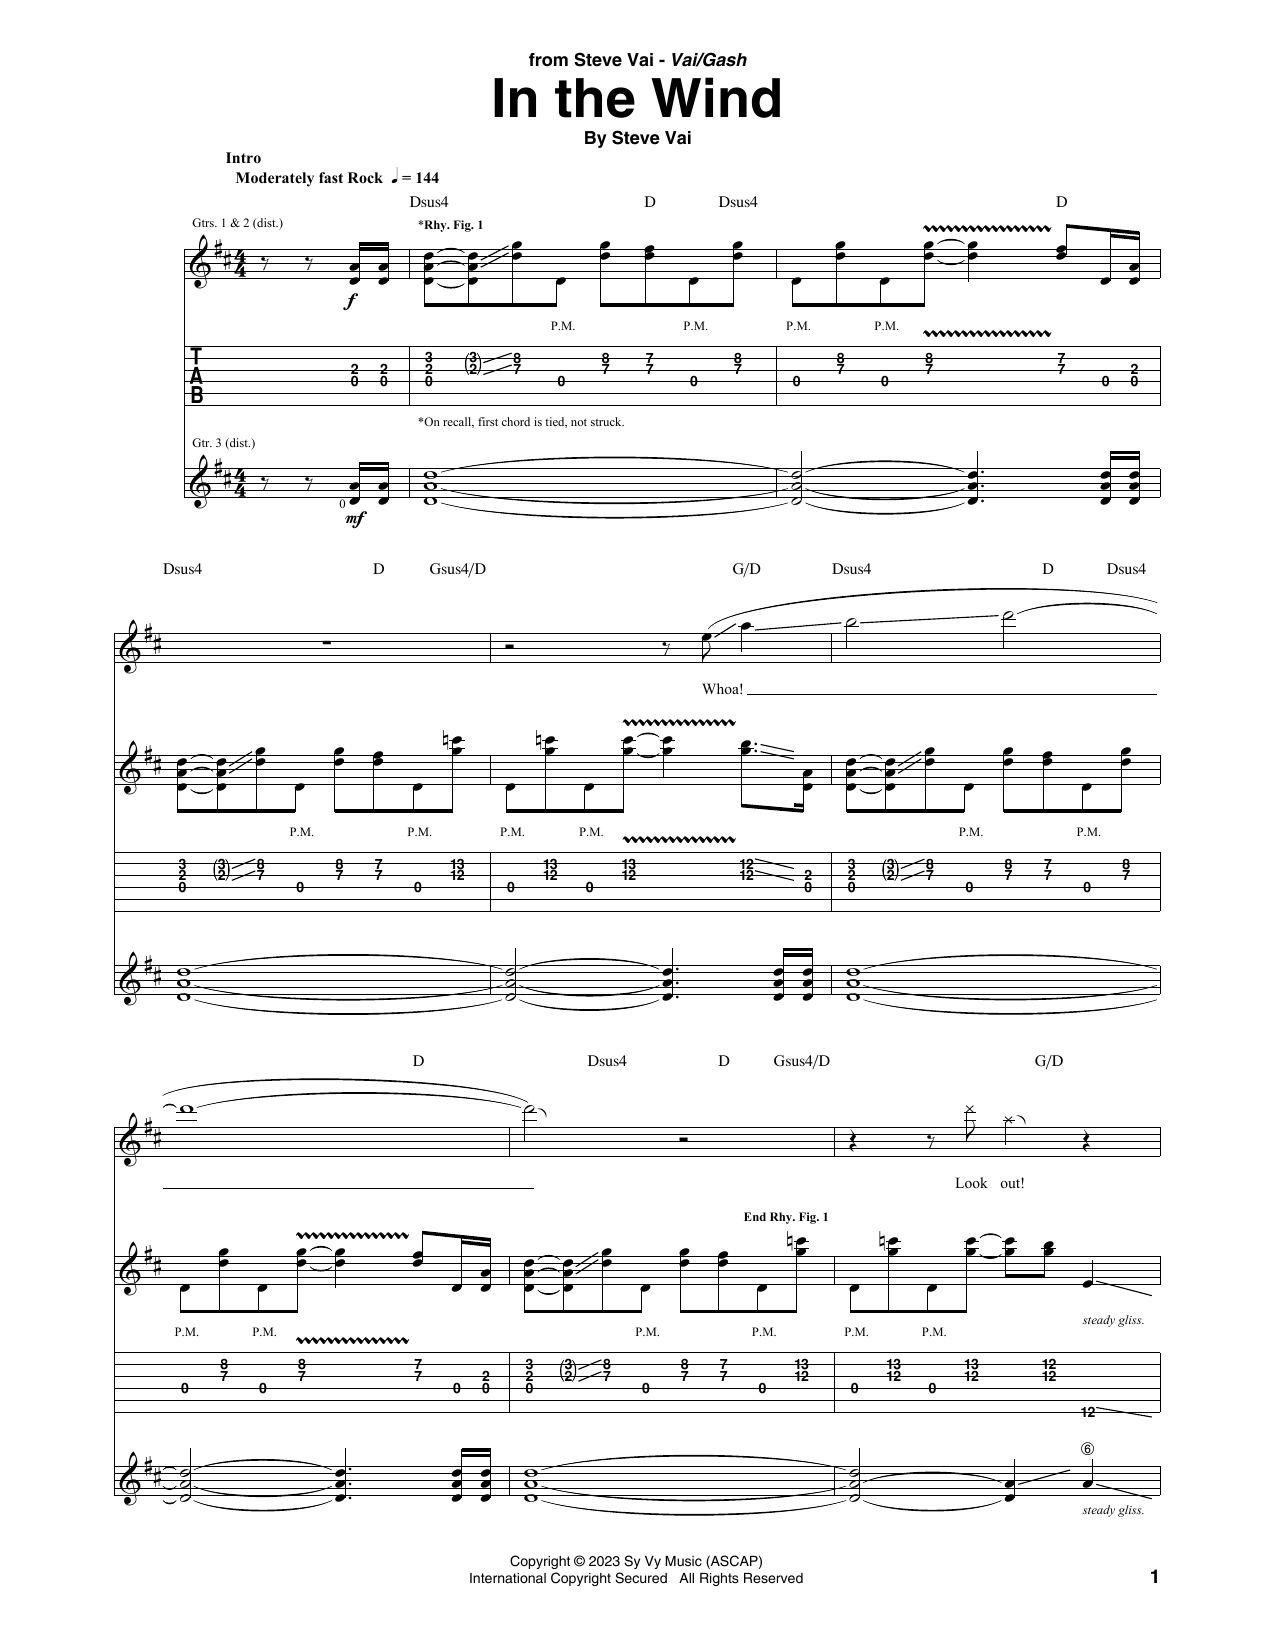 Download Steve Vai In The Wind Sheet Music